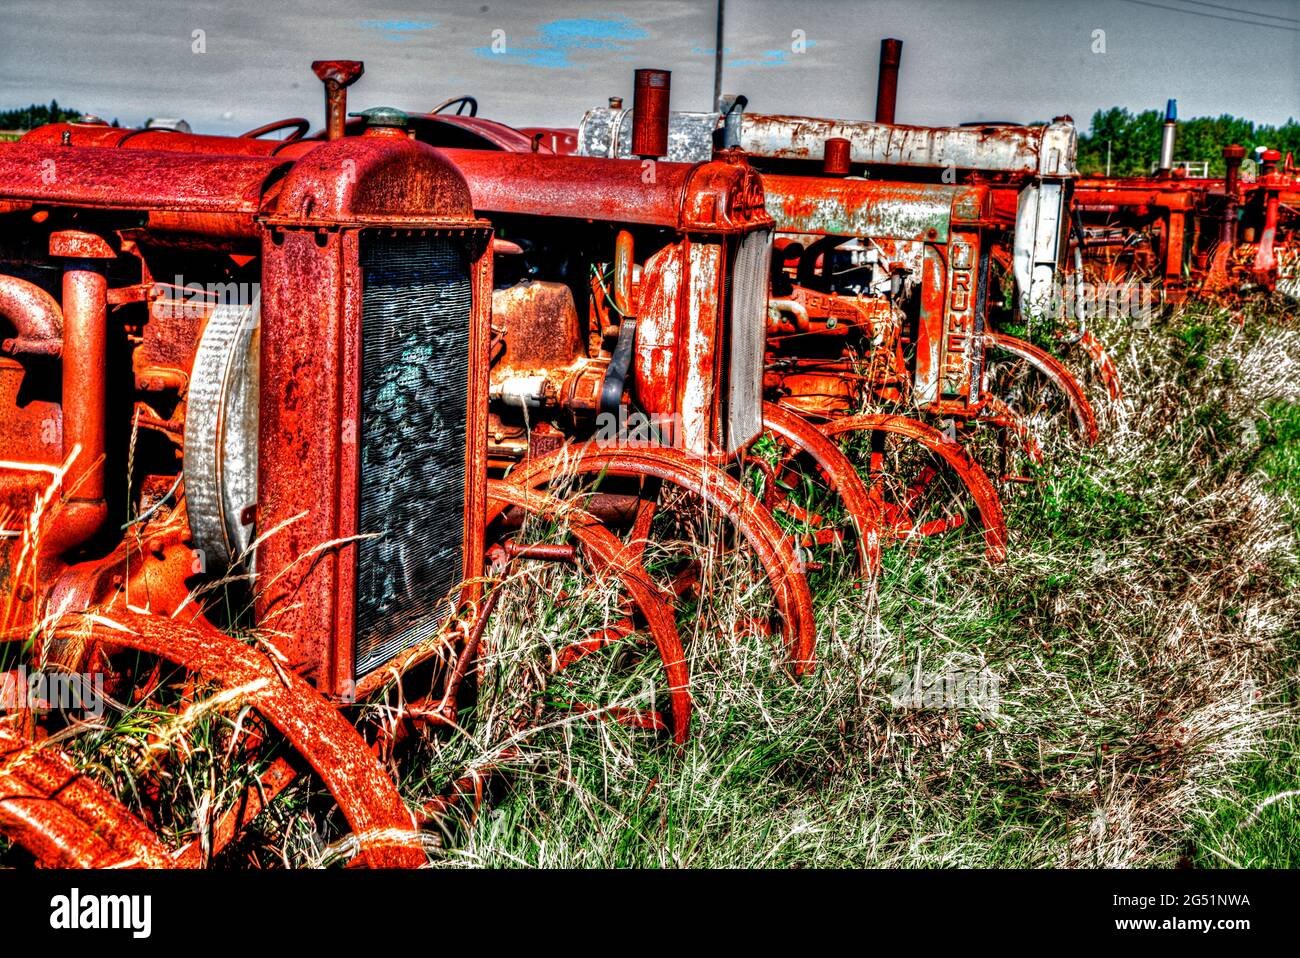 Row of old red abandoned rusty tractors Stock Photo